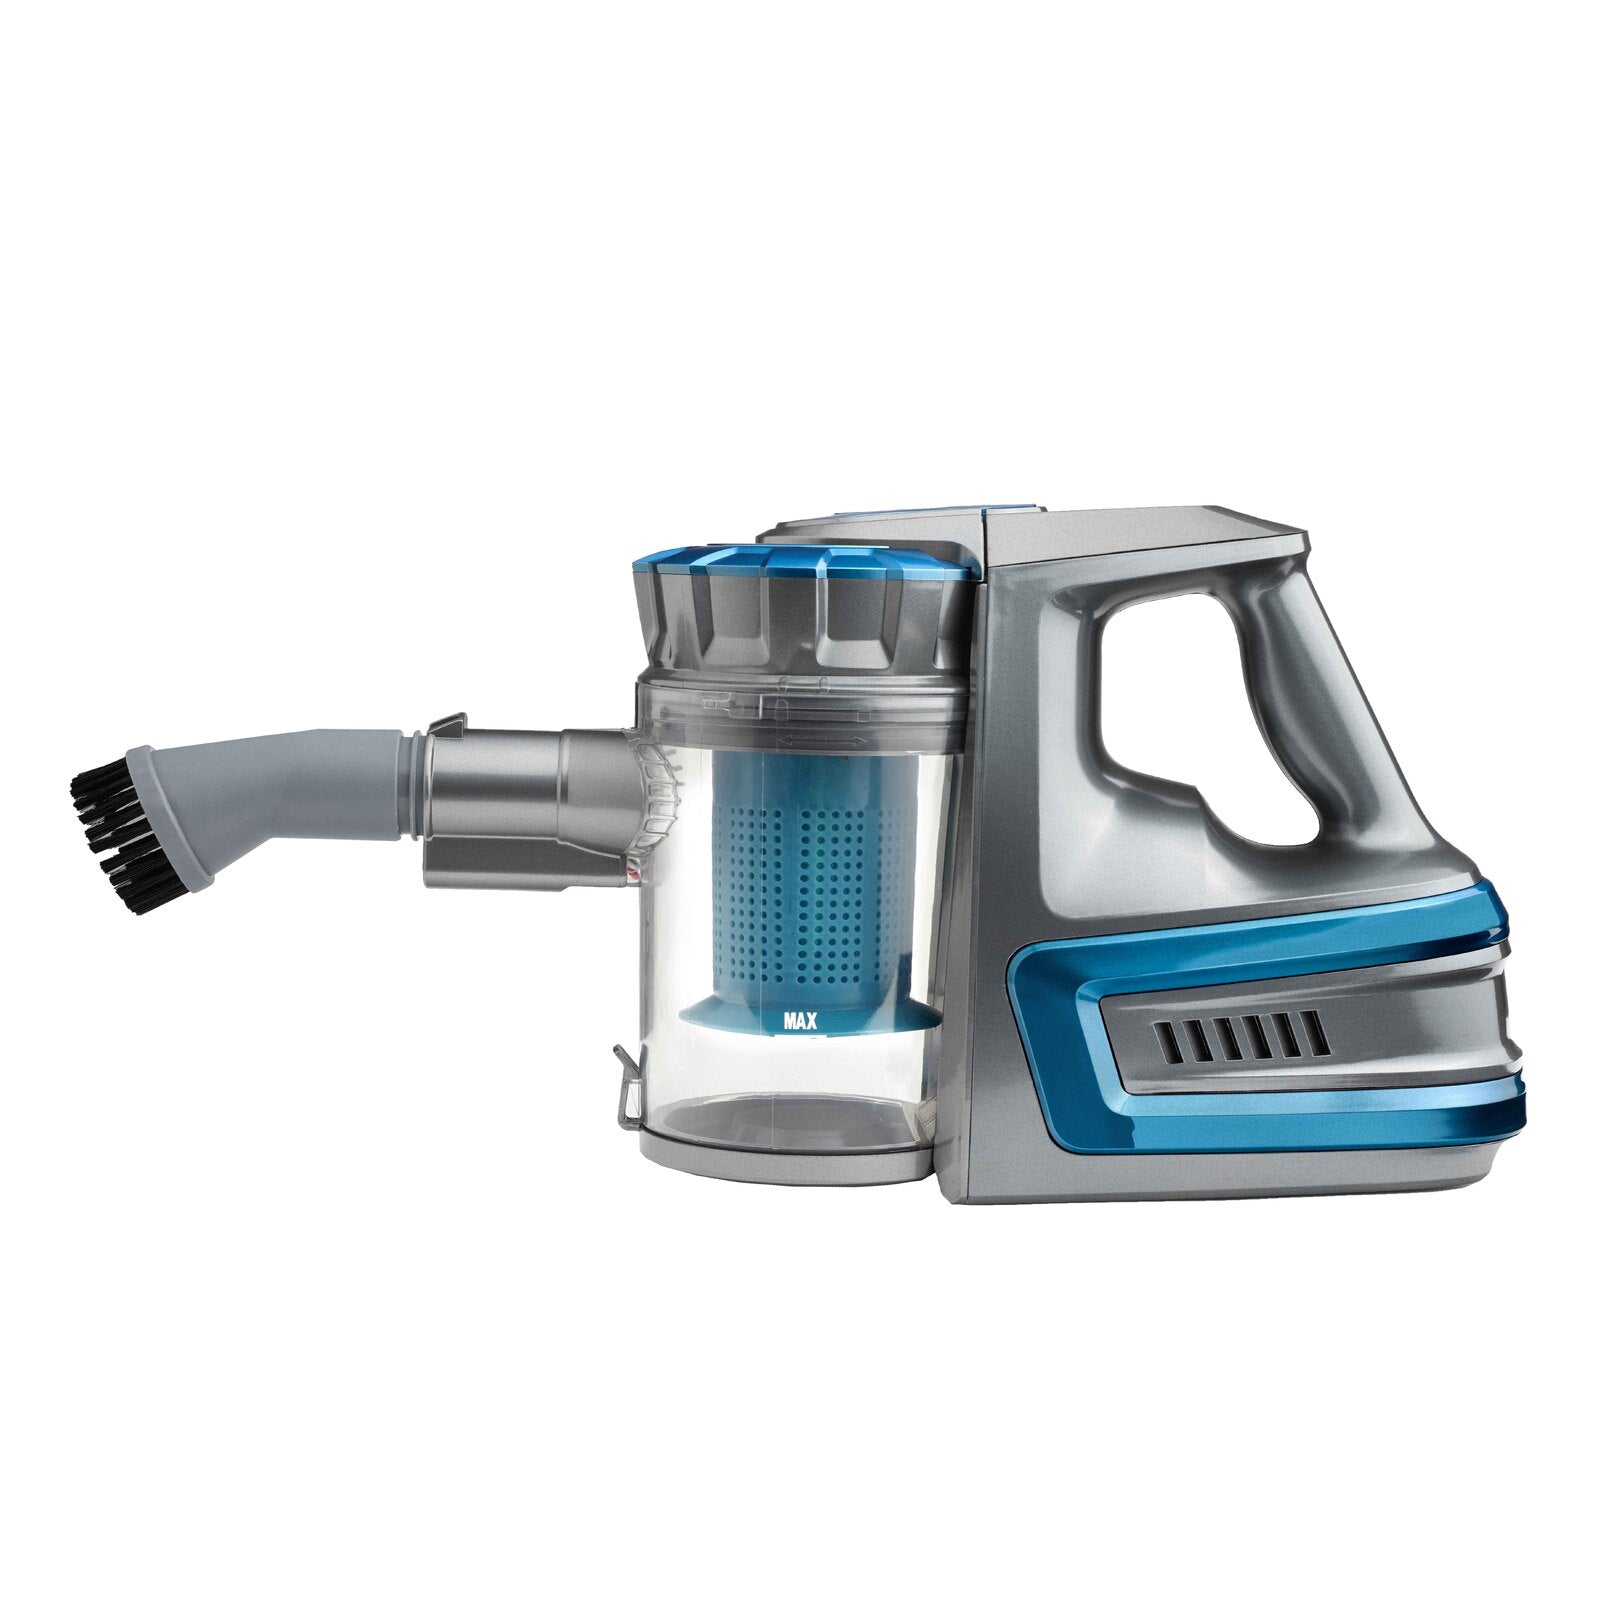 Rechargeable Cordless Vacuum Cleaner